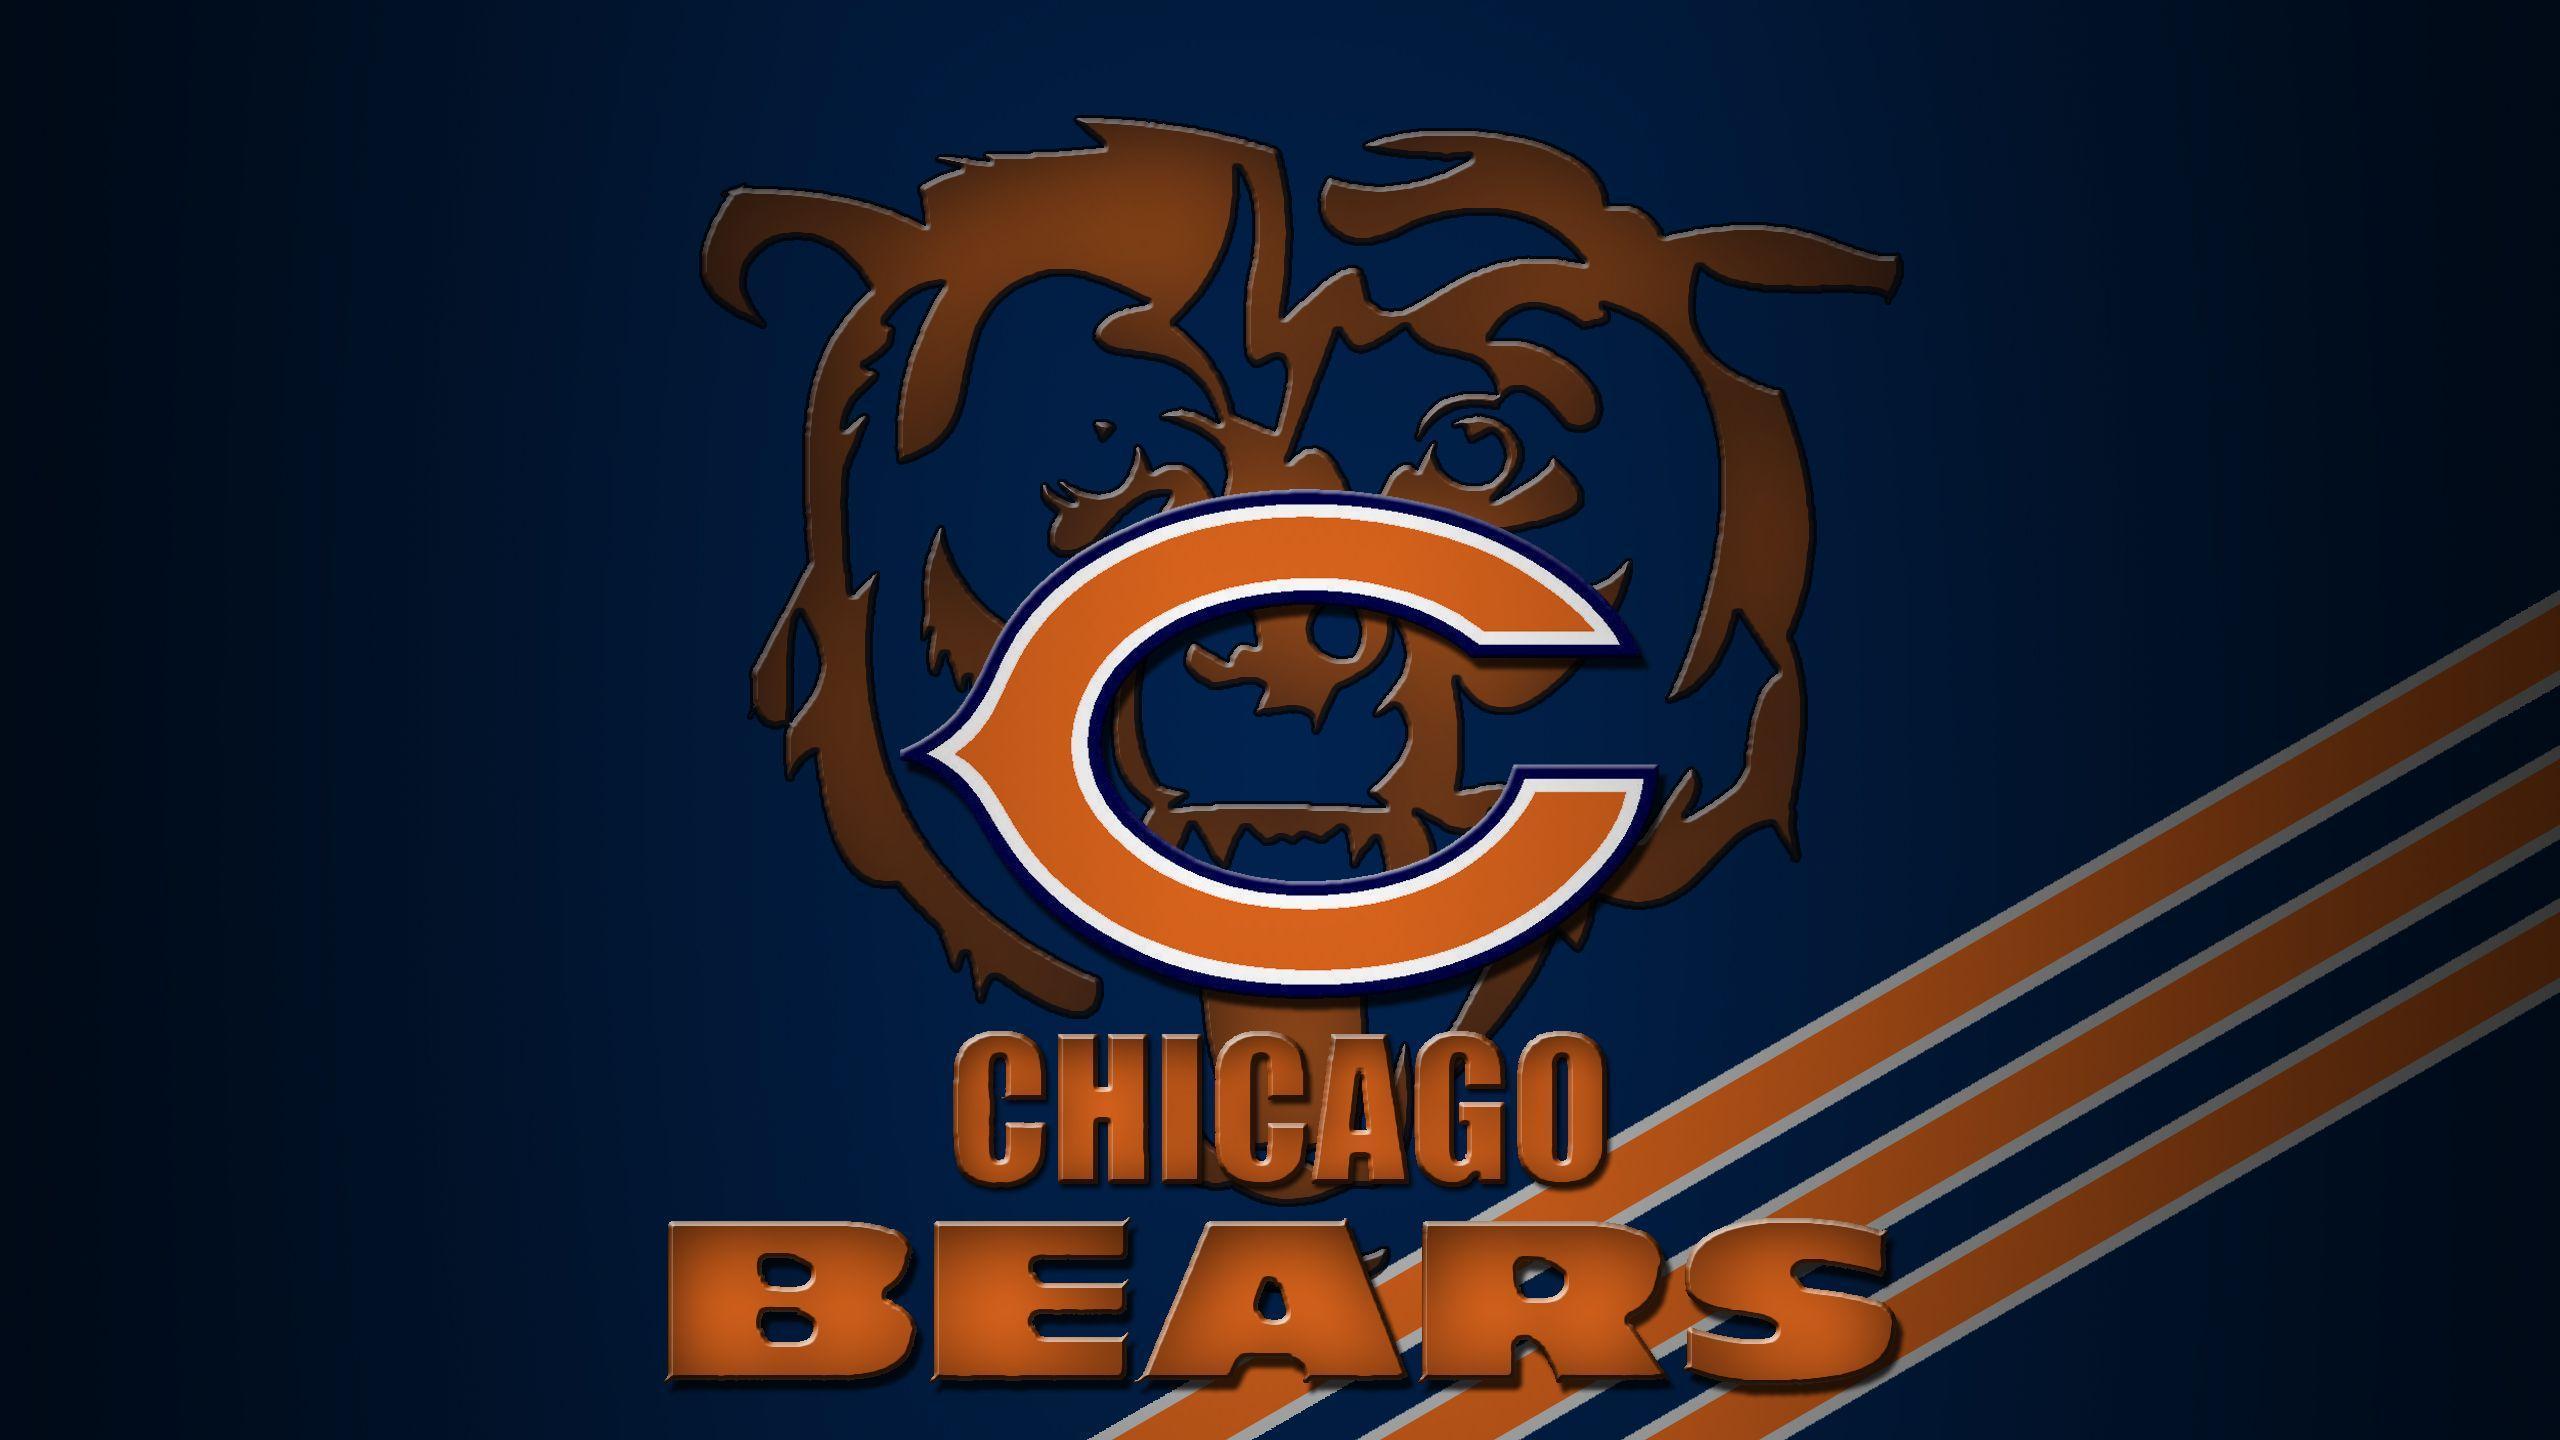 Chicago Bears Wallpapers 2016 2560x1440